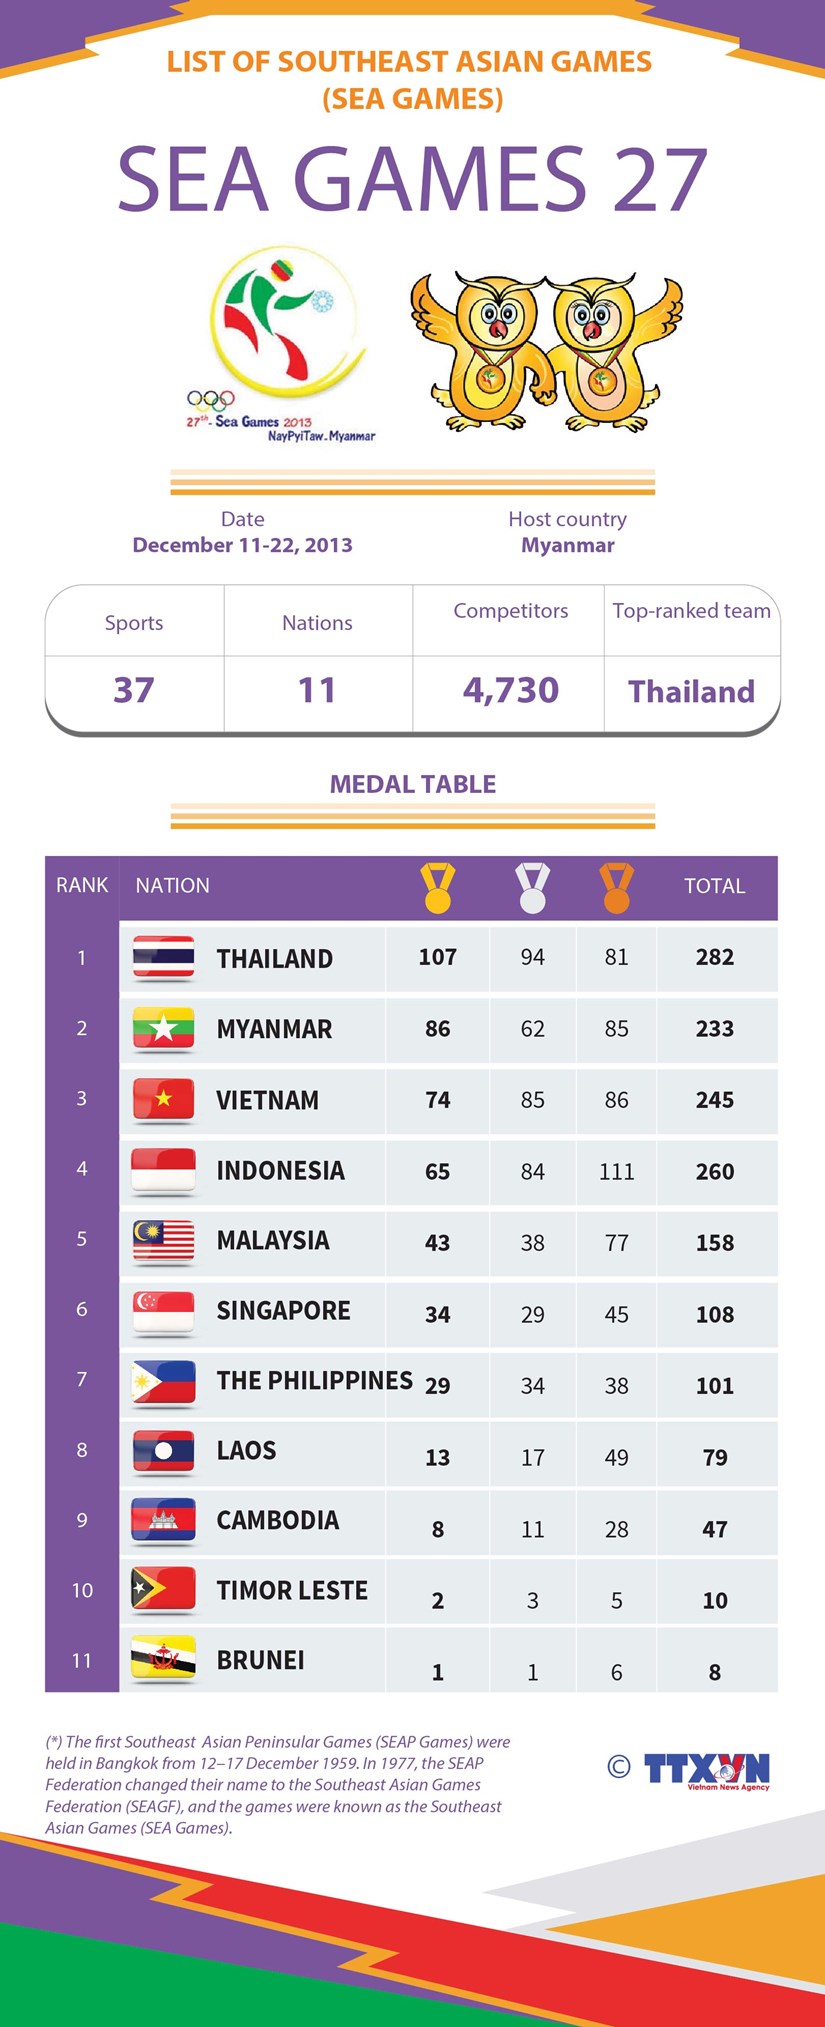 List of Southeast Asian Games: SEA Games 27 hinh anh 1